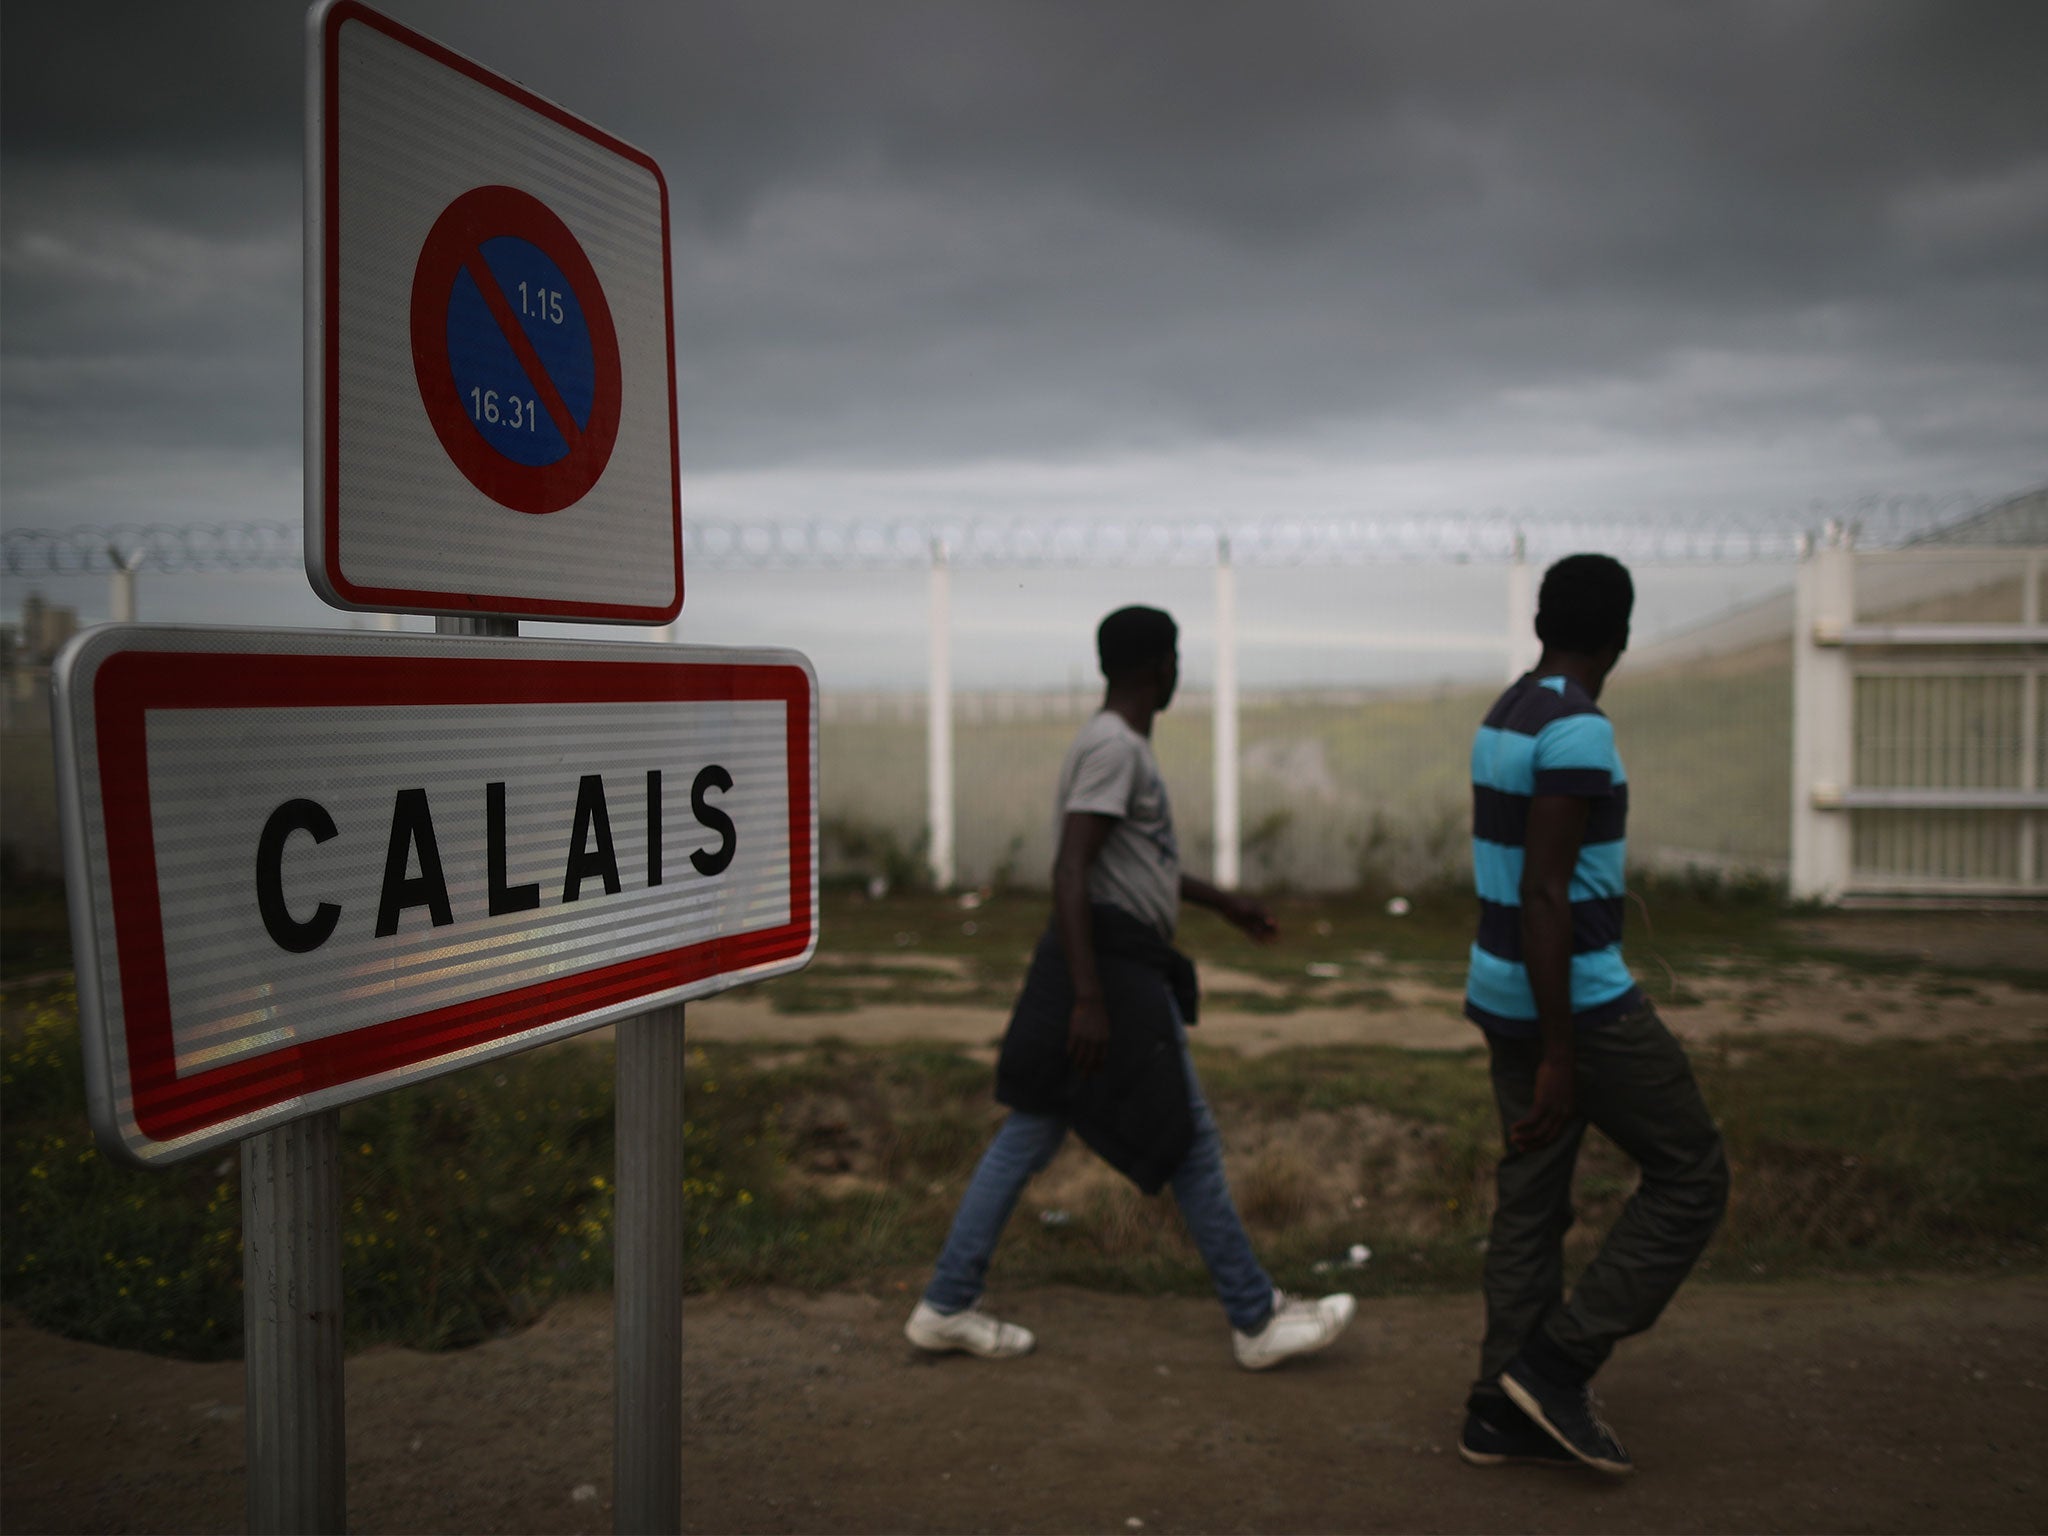 An estimated 10,000 people live in Calais migrant and refugee camps